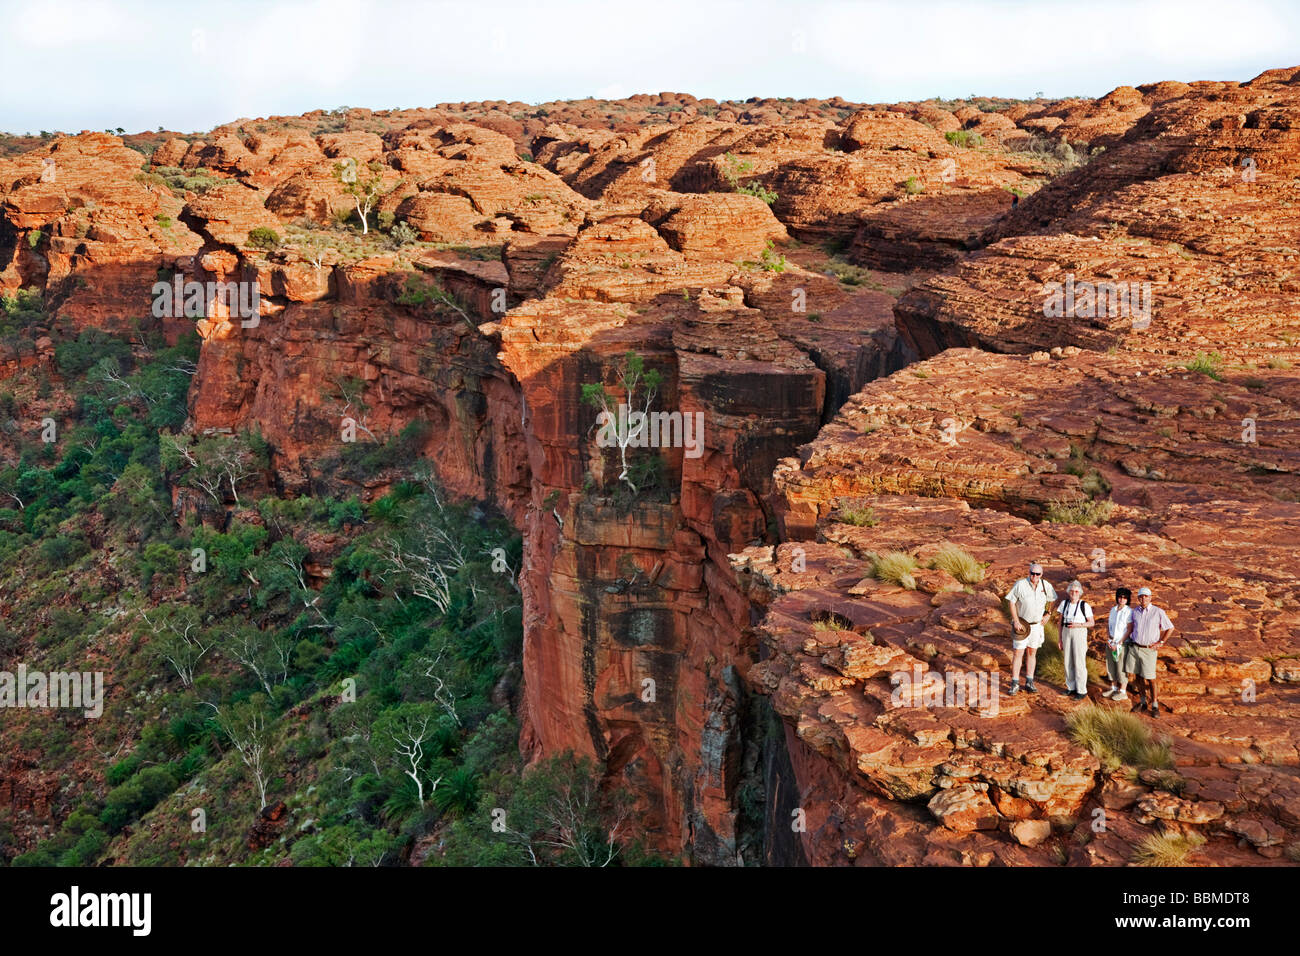 Australia, Northern Territory. Hikers pause at the edge of a cliff among the red rock formations at Kings Canyon. Stock Photo